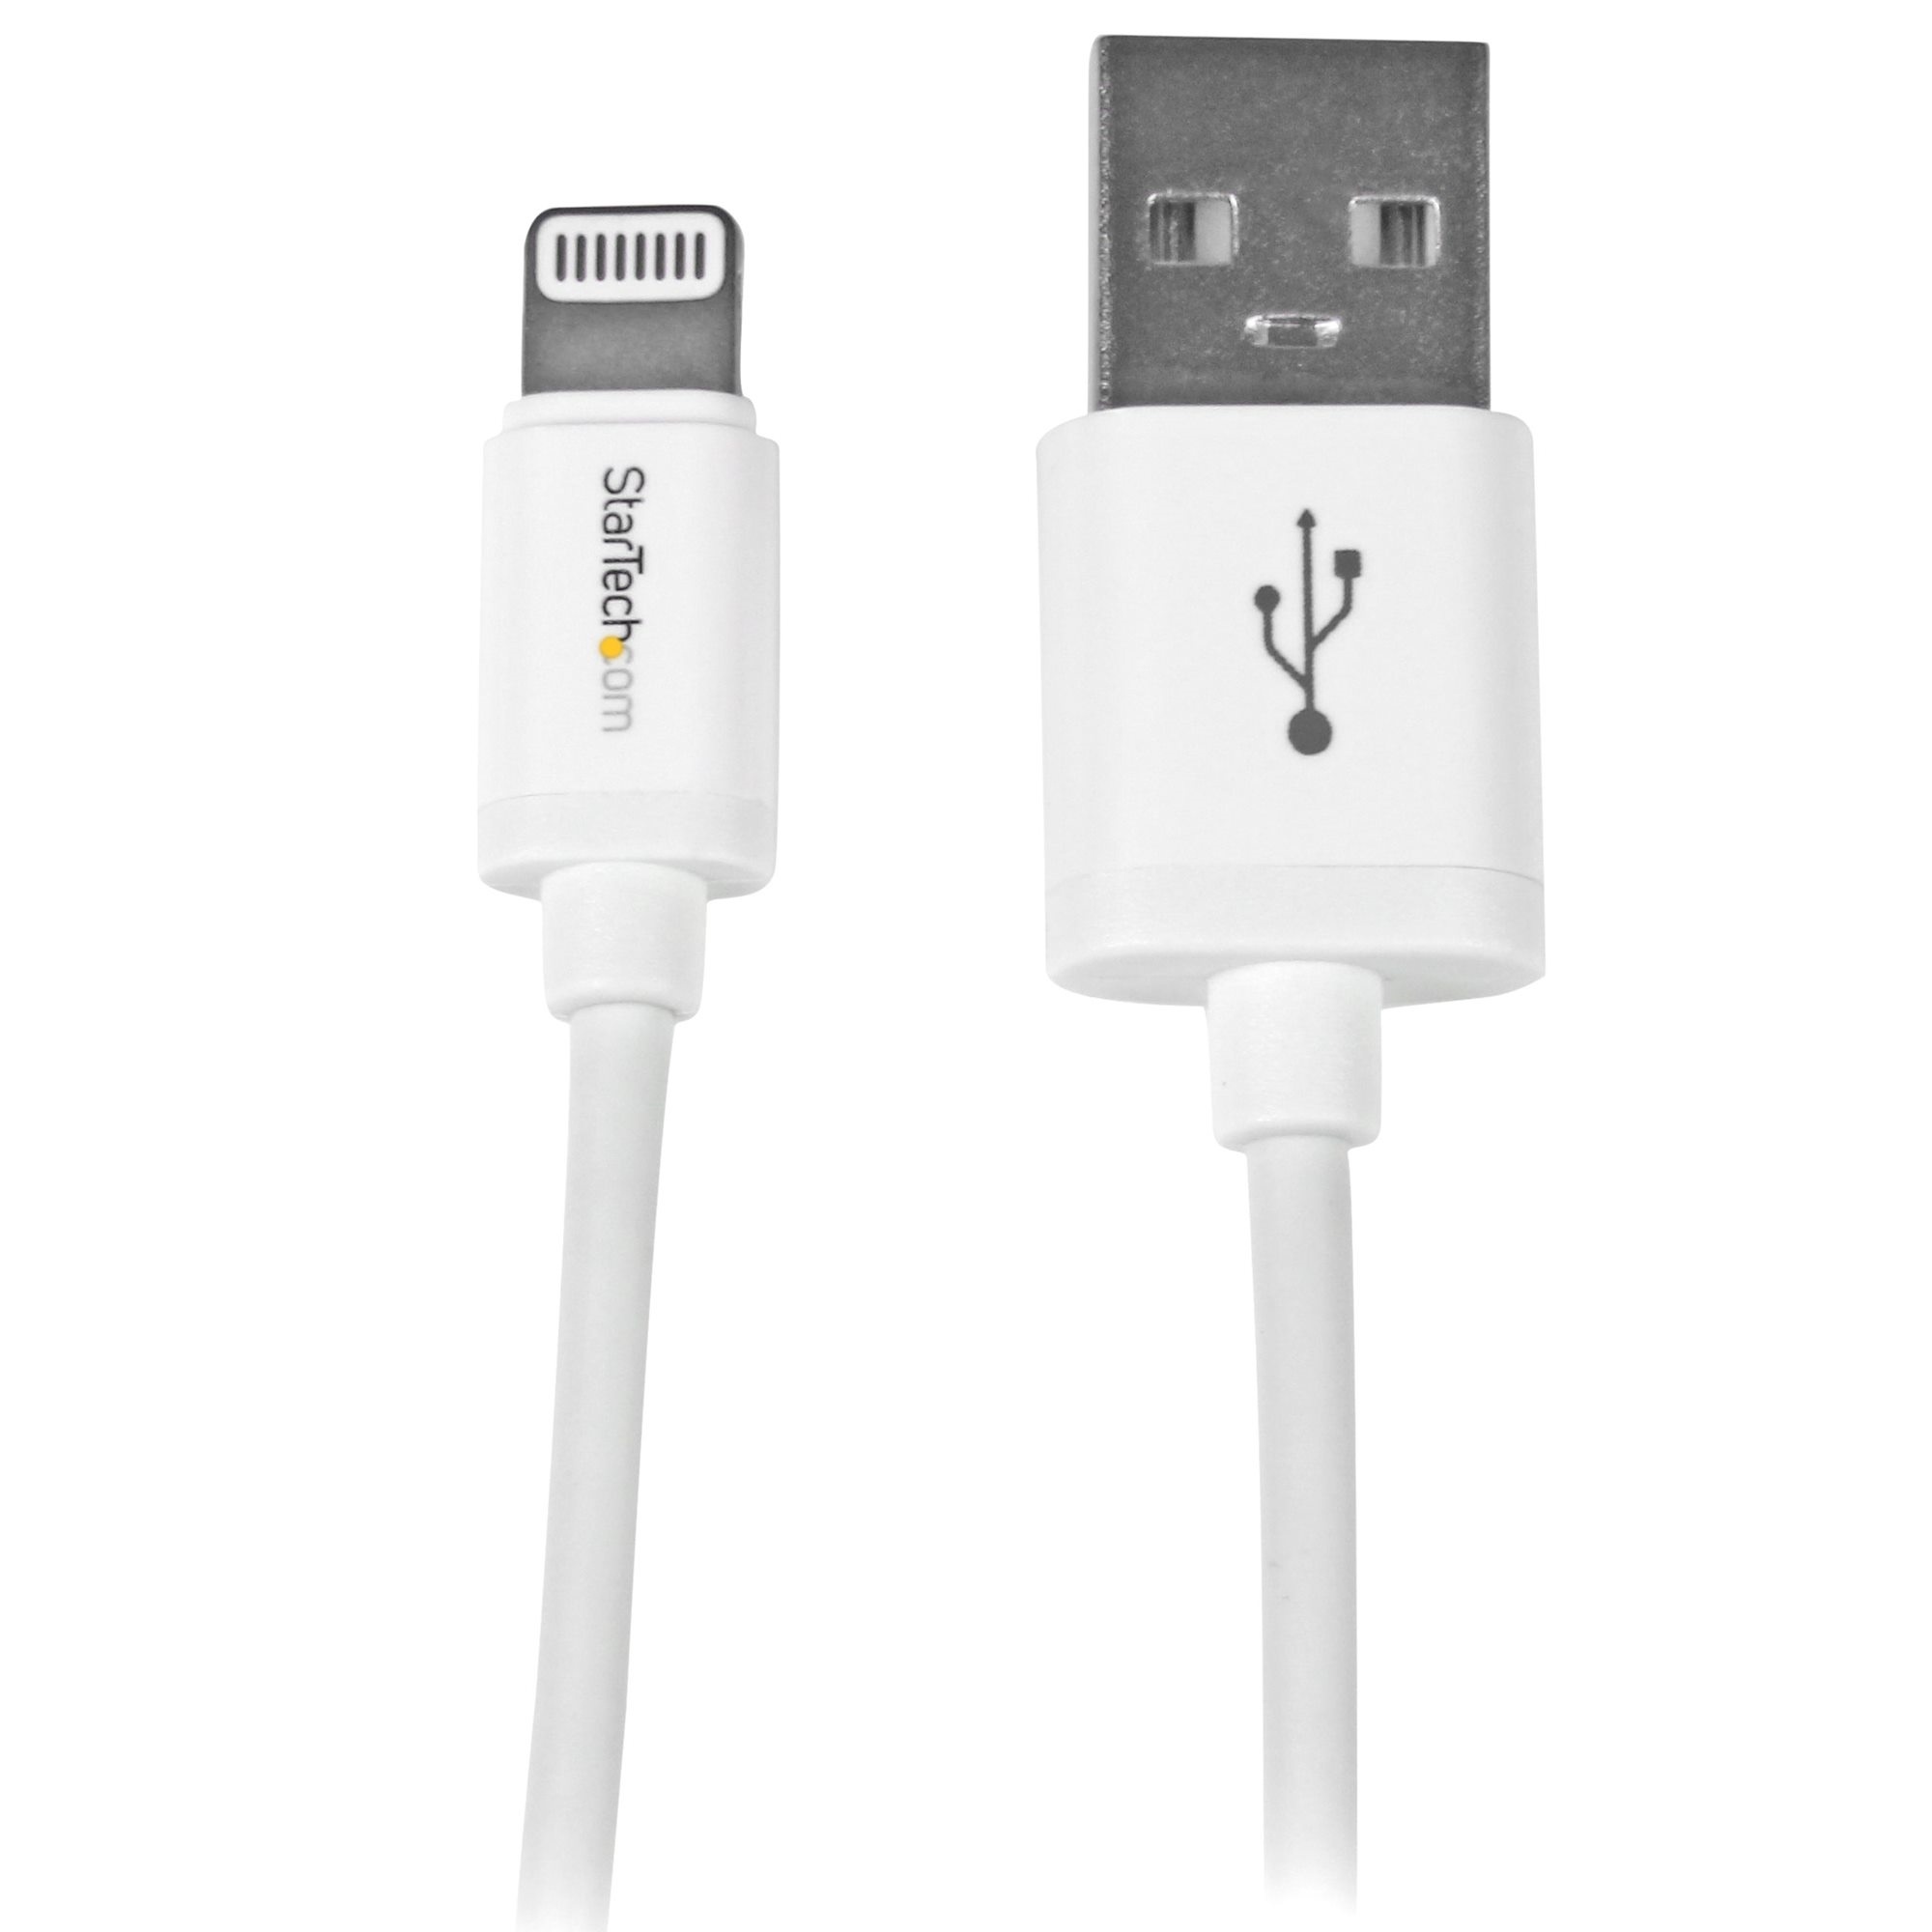 StarTech 8-pin Lightning to USB Cable (White, 15.2cm)